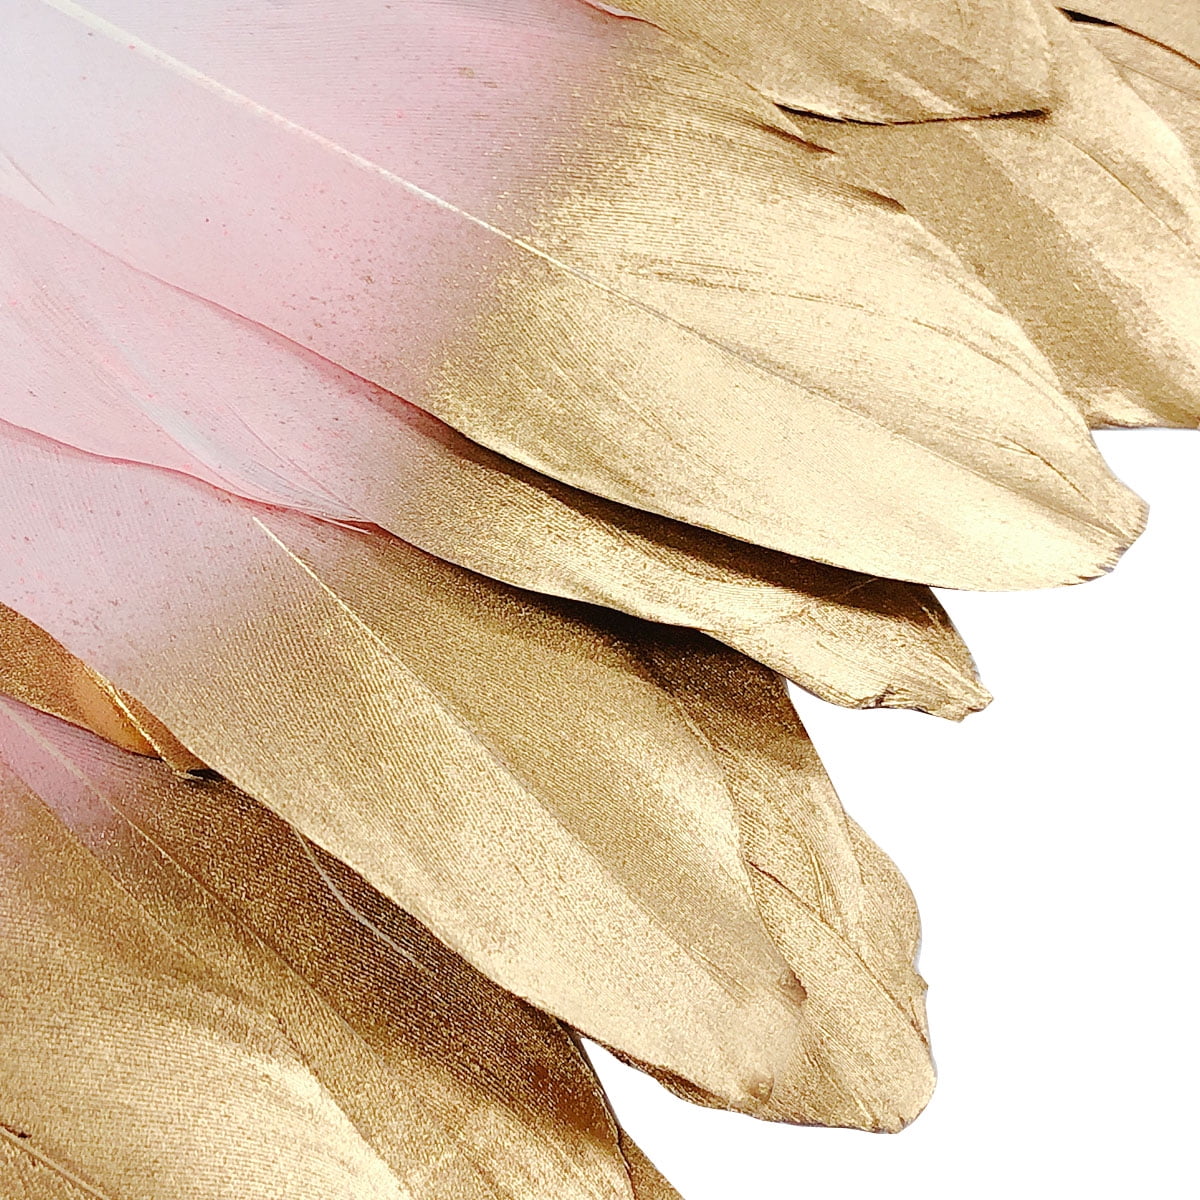 Wrapables A71279c Gold Dipped, Bohemian Decorations for Weddings, Parties, DIY Art Projects, Teal Feathers